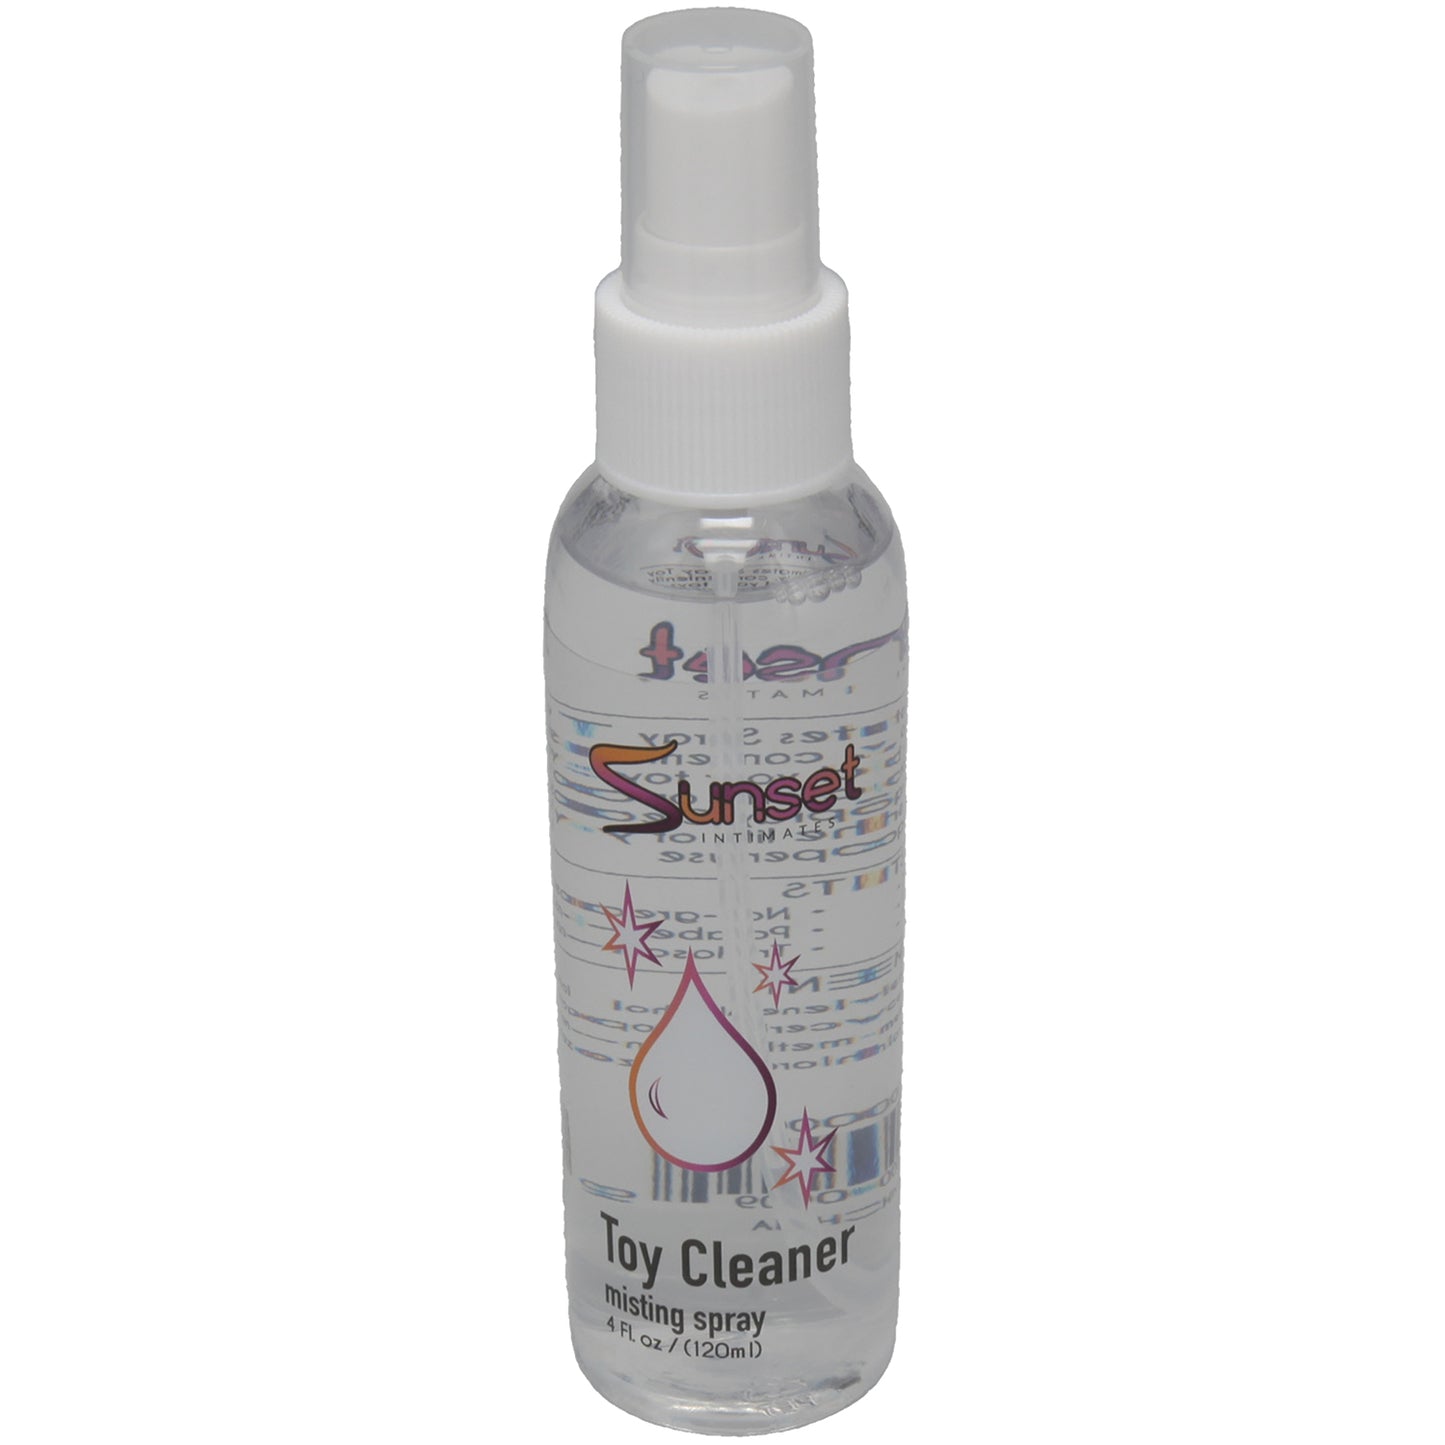 Sunset Intimates Misting Sex Toy Cleaner